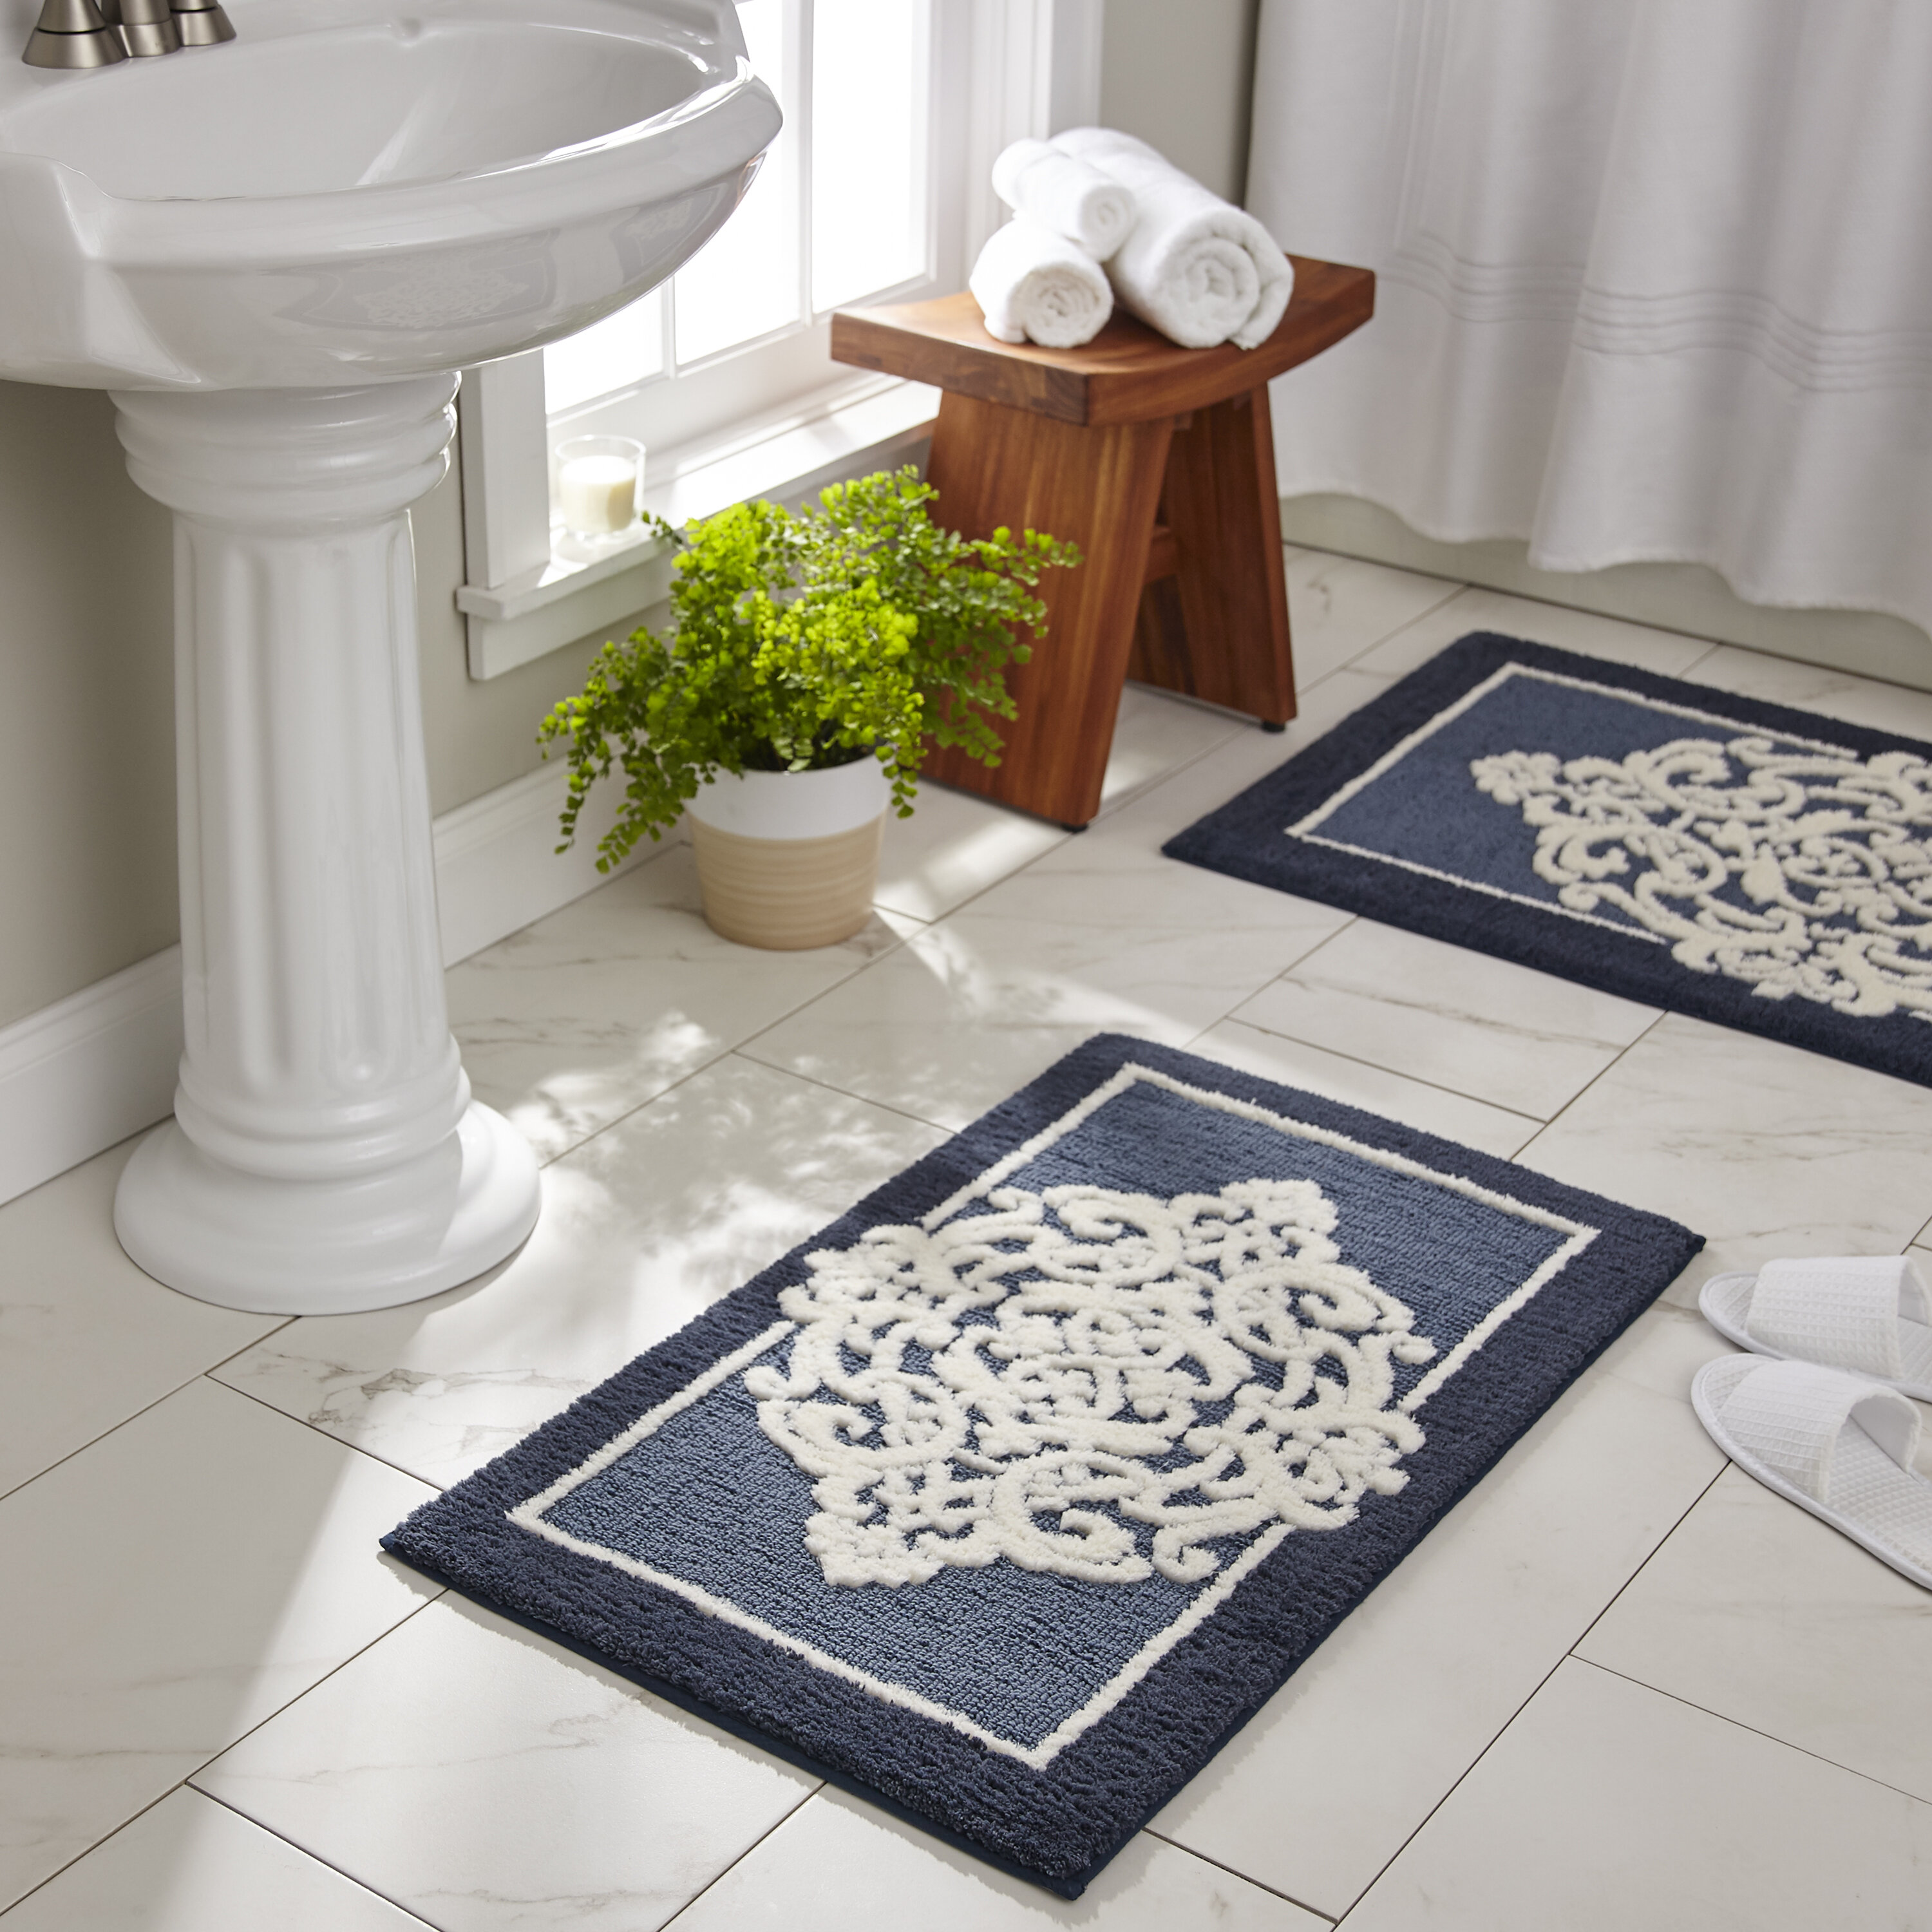 small bathroom rugs and mats